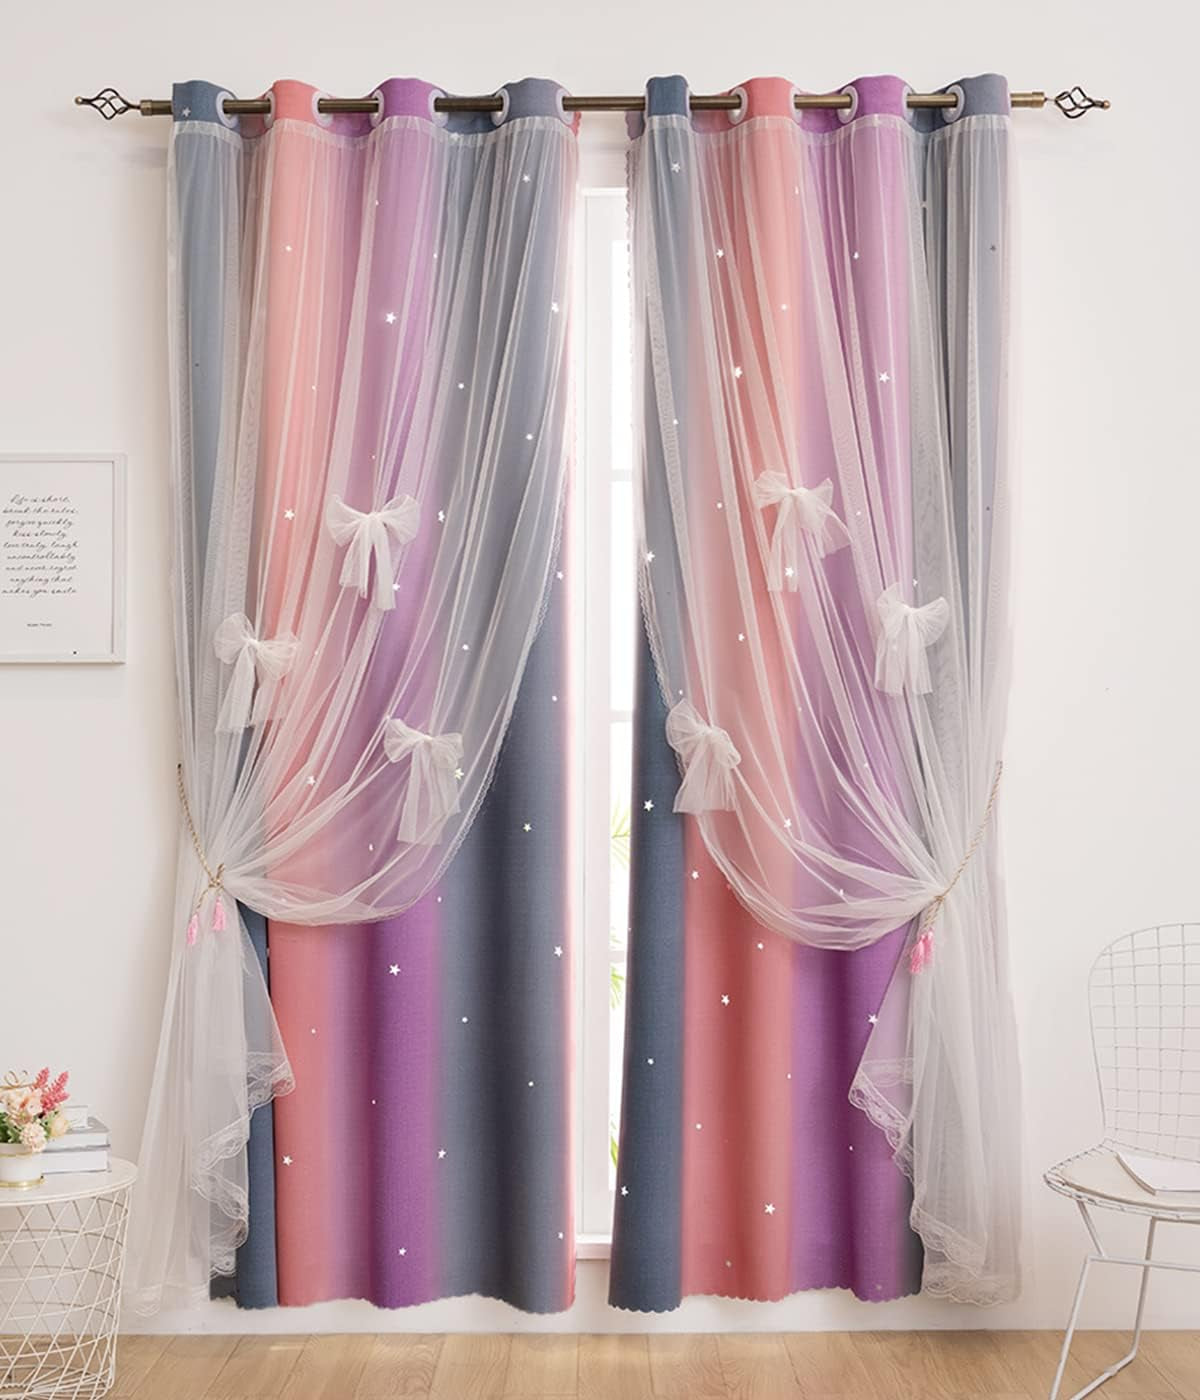 Yancorp Curtains for Girls Bedroom Kids Room Curtain Colorful Window Nursery Curtain 63 Inches Length Room Darkening Grommet 2 Layers (Pink Purple, W52 X L63)  Yancorp Purple Pink Grey W52" X L63" 